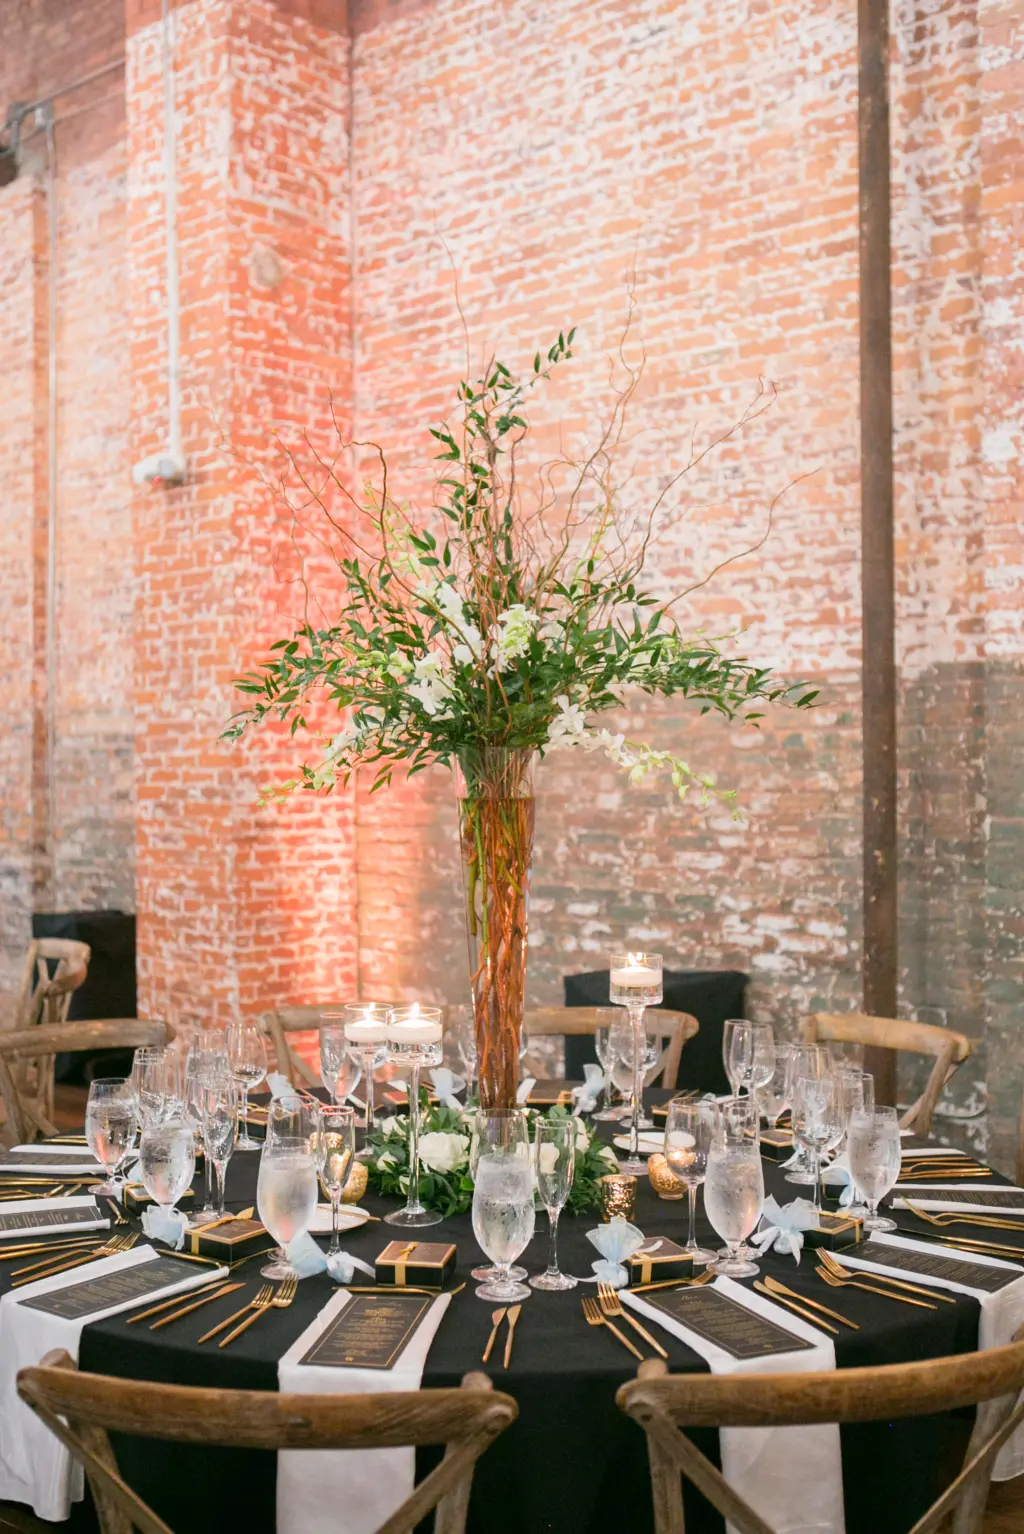 Tall Vase Centerpiece Inspiration with Branches, Greenery, and Stock Flowers | Modern Black and Gold Wedding Reception Table Setting Ideas | Tampa Bay Kate Ryan Event Rentals